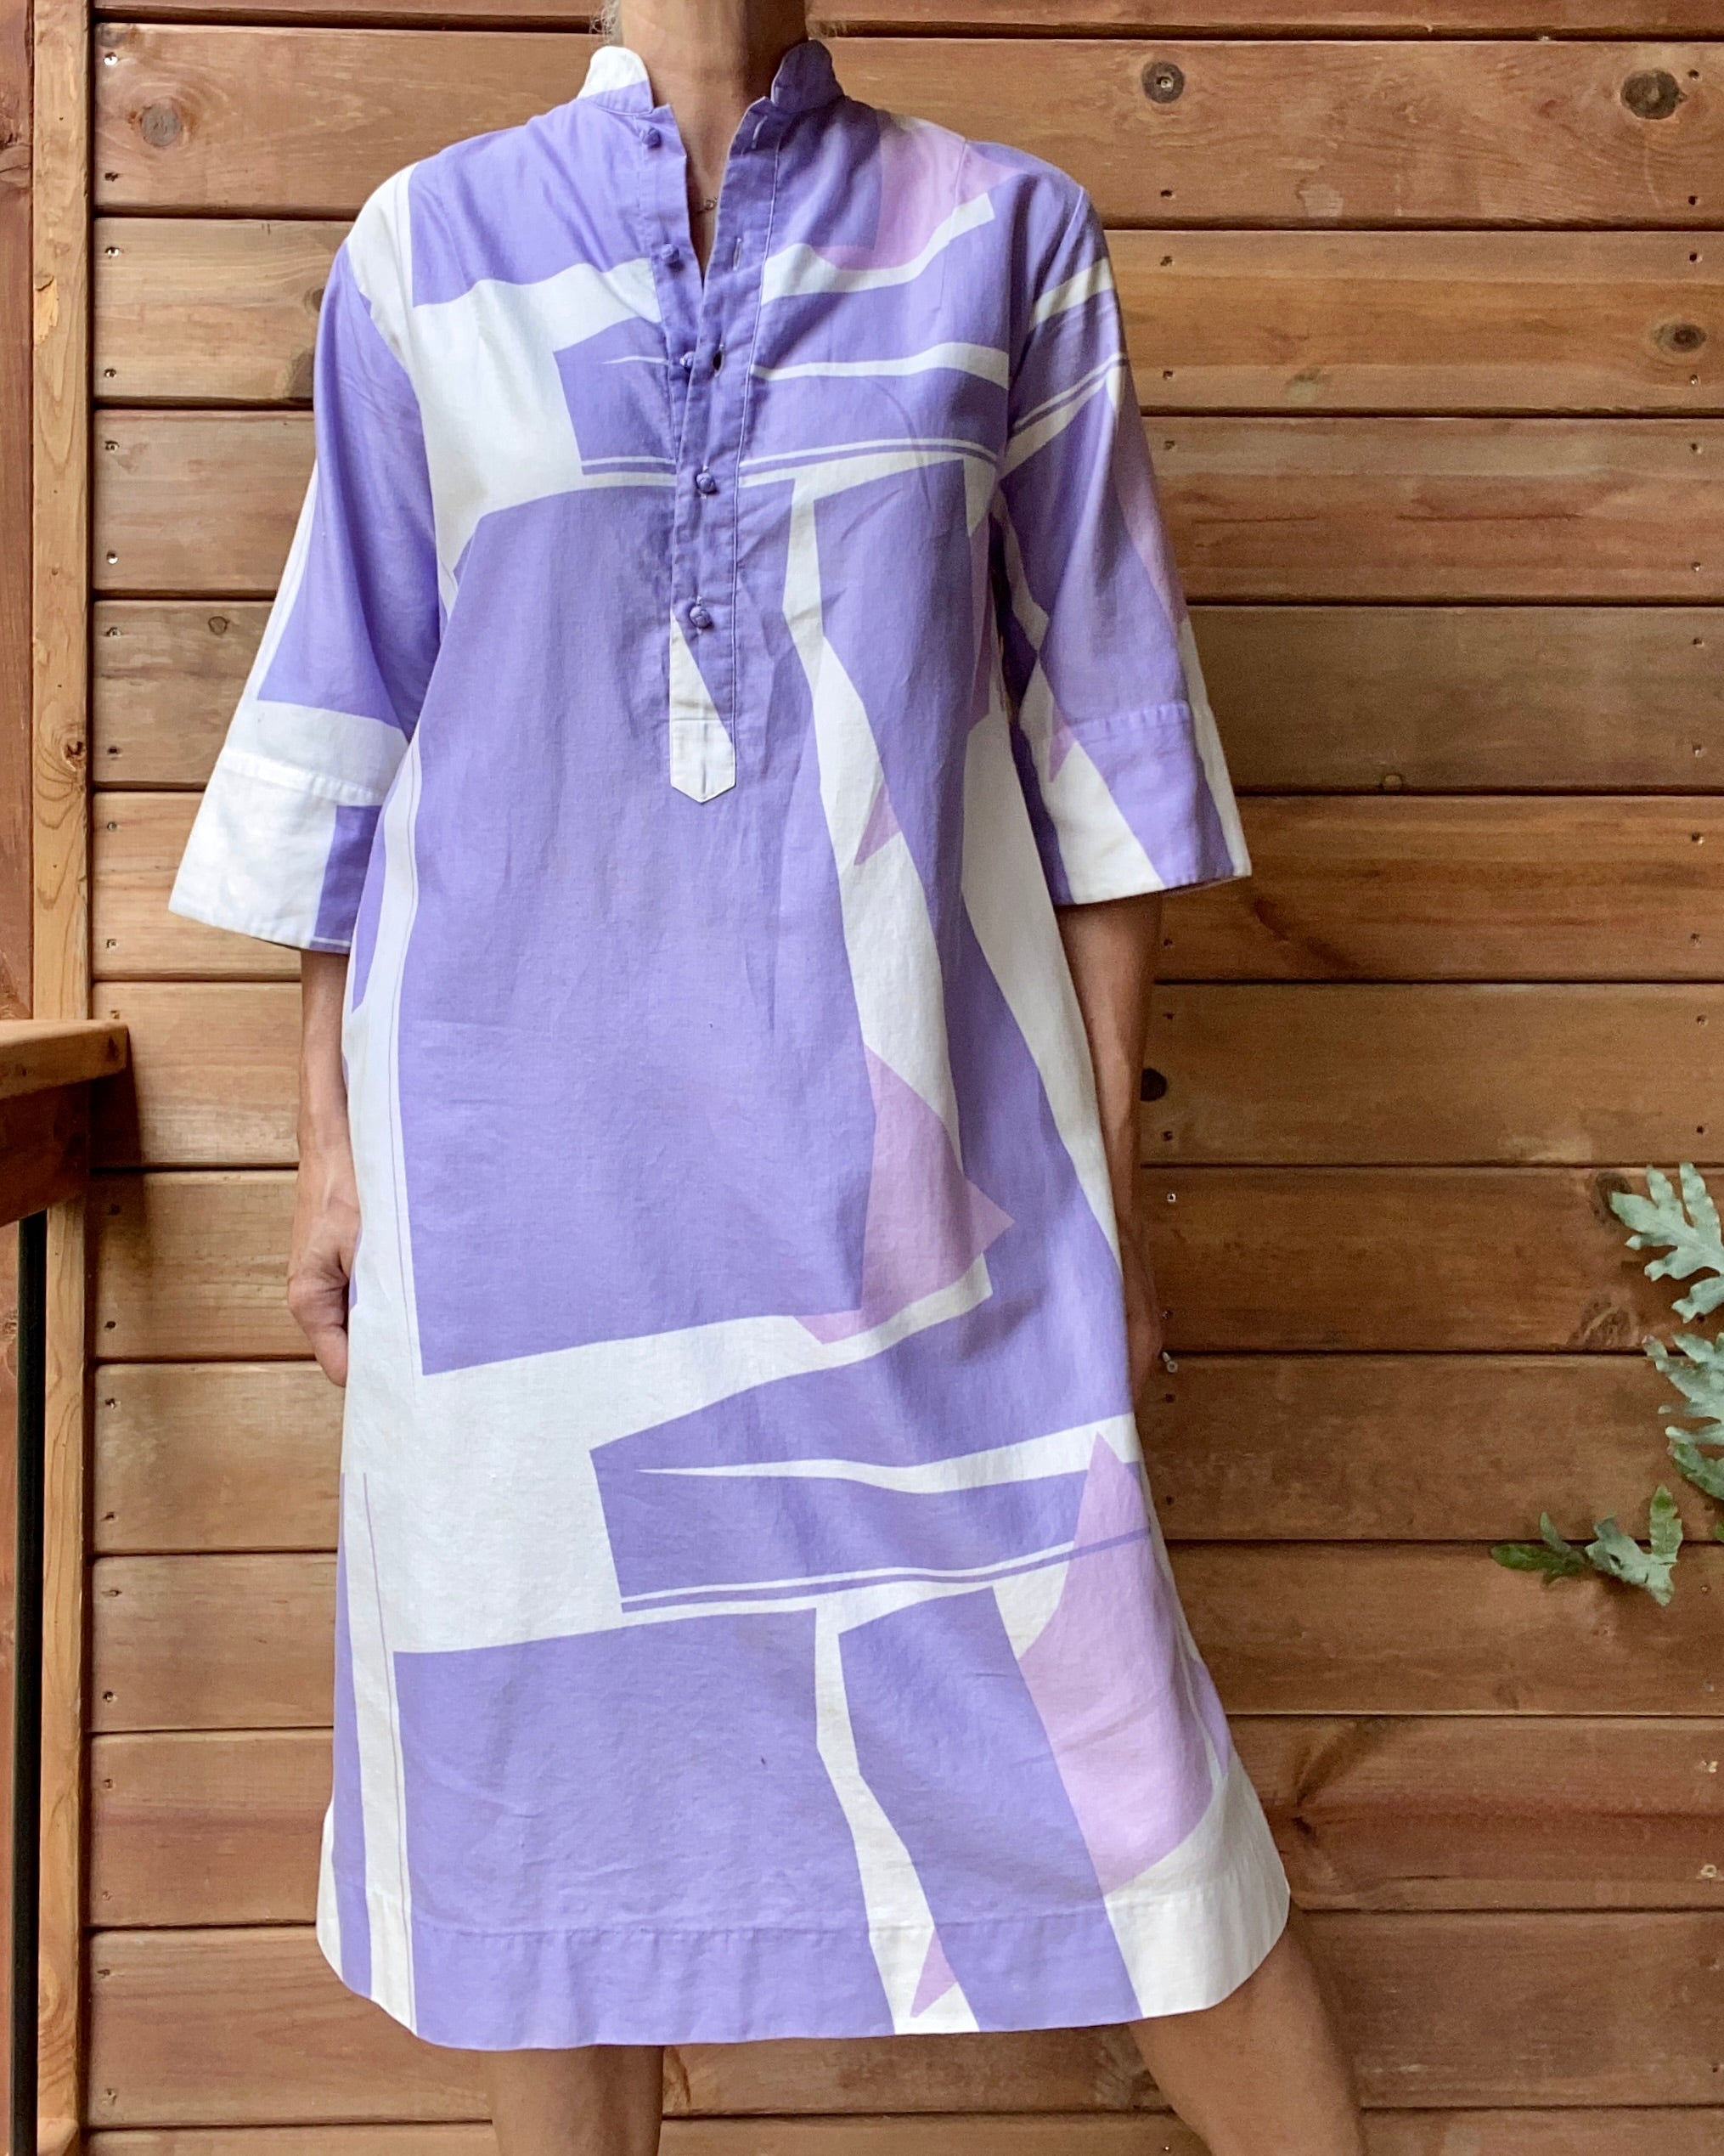 Vintage Catherine Ogust for Penthouse Gallery "Forever Dress" Abstract Geometric Pastels Purple Cotton Dress Tunic Caftan M L